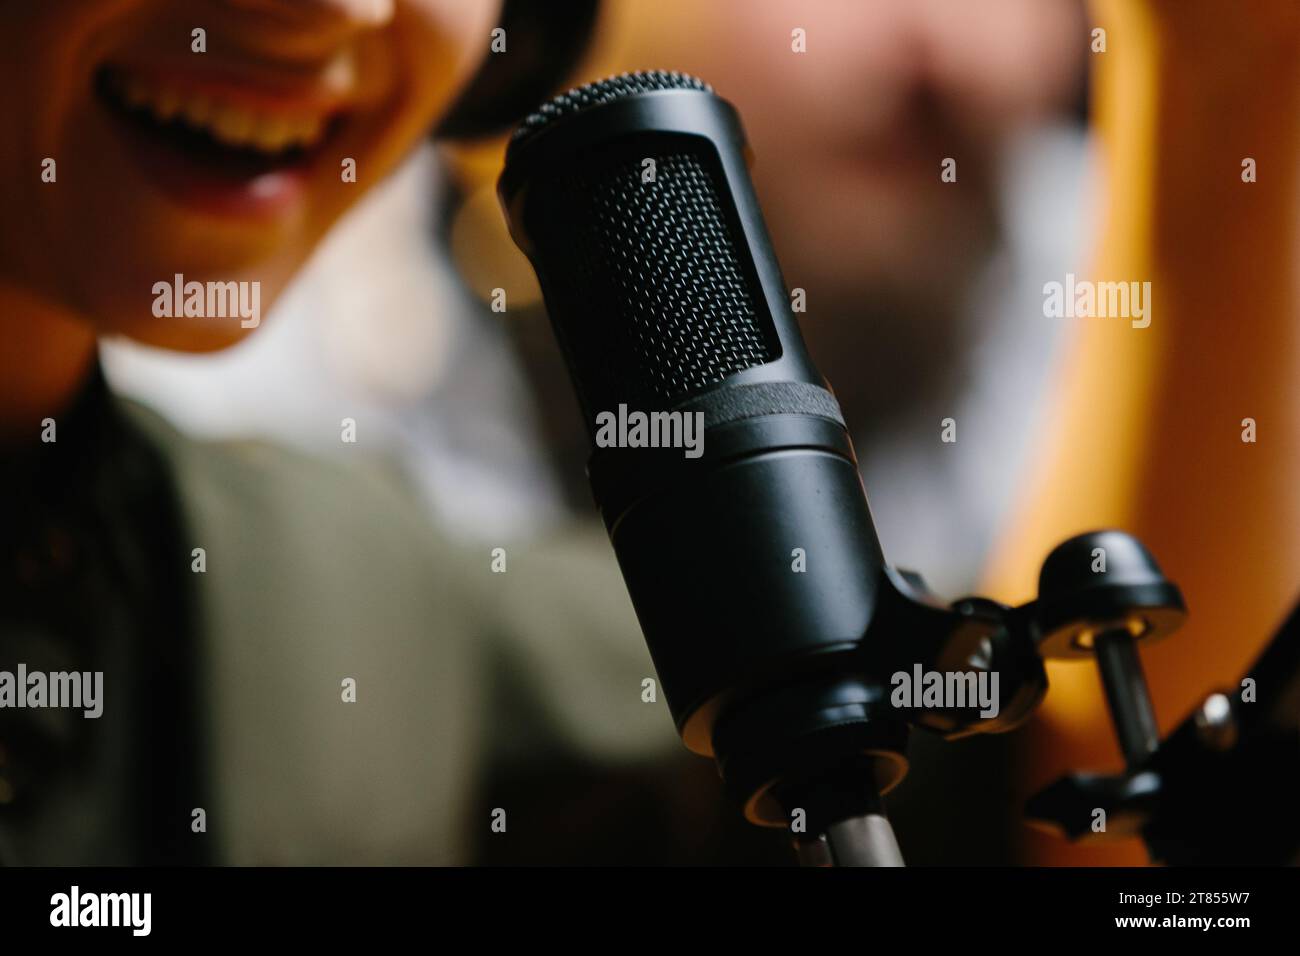 Close-up, dubbing actor or radio host speaking into a microphone. Stock Photo